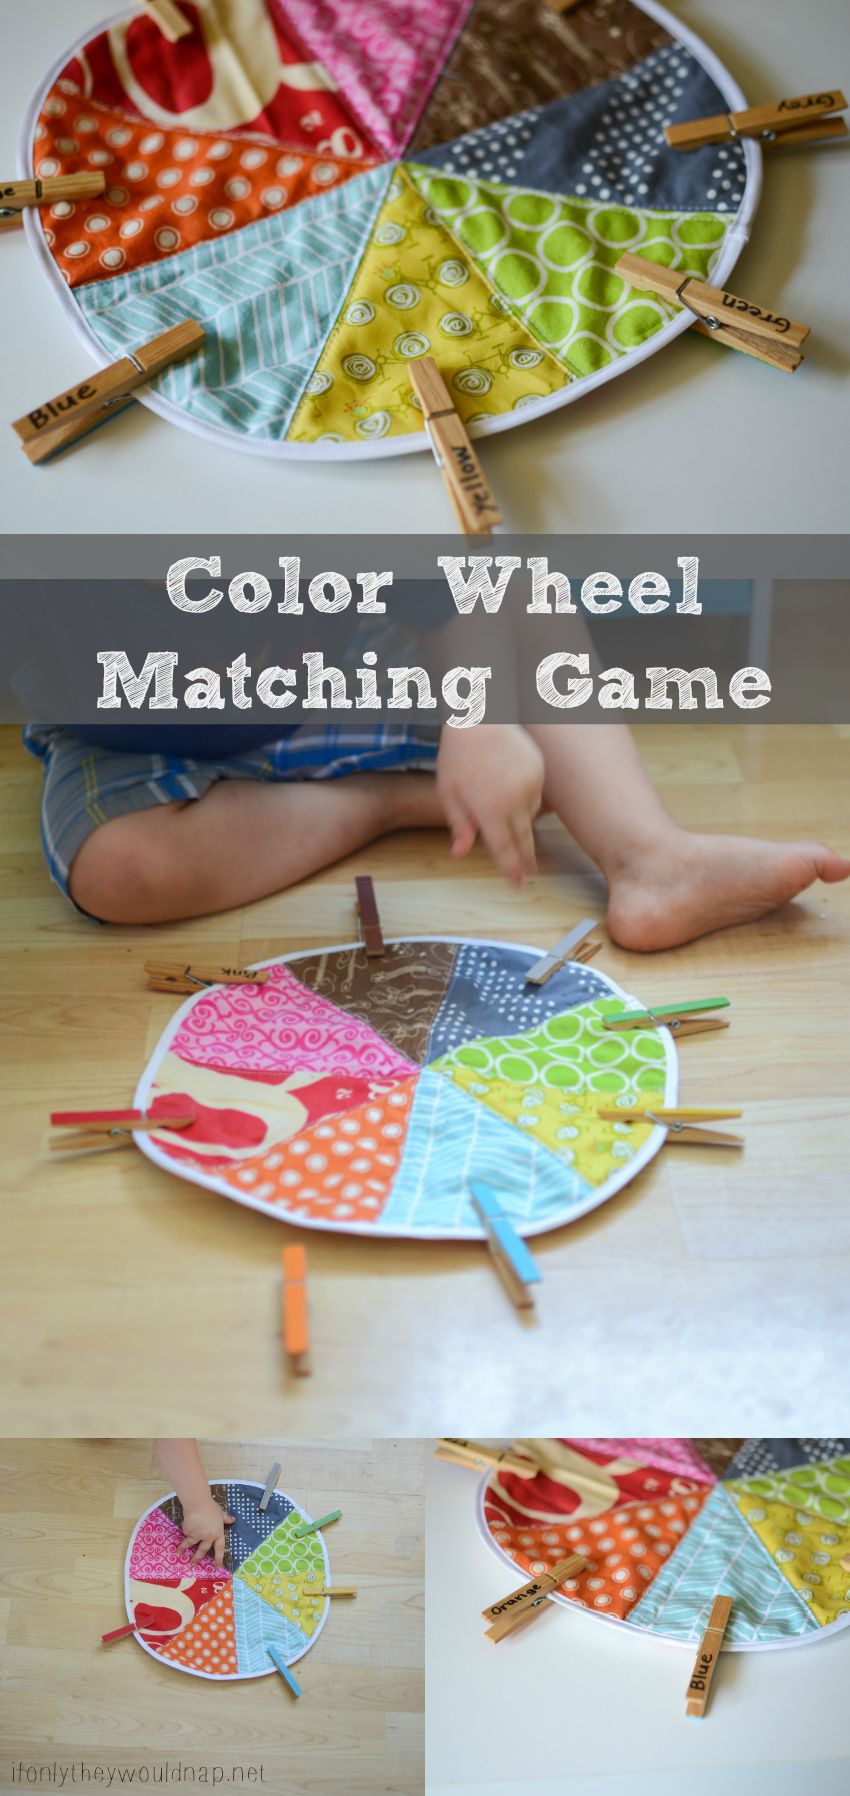 Color Wheel Matching Game